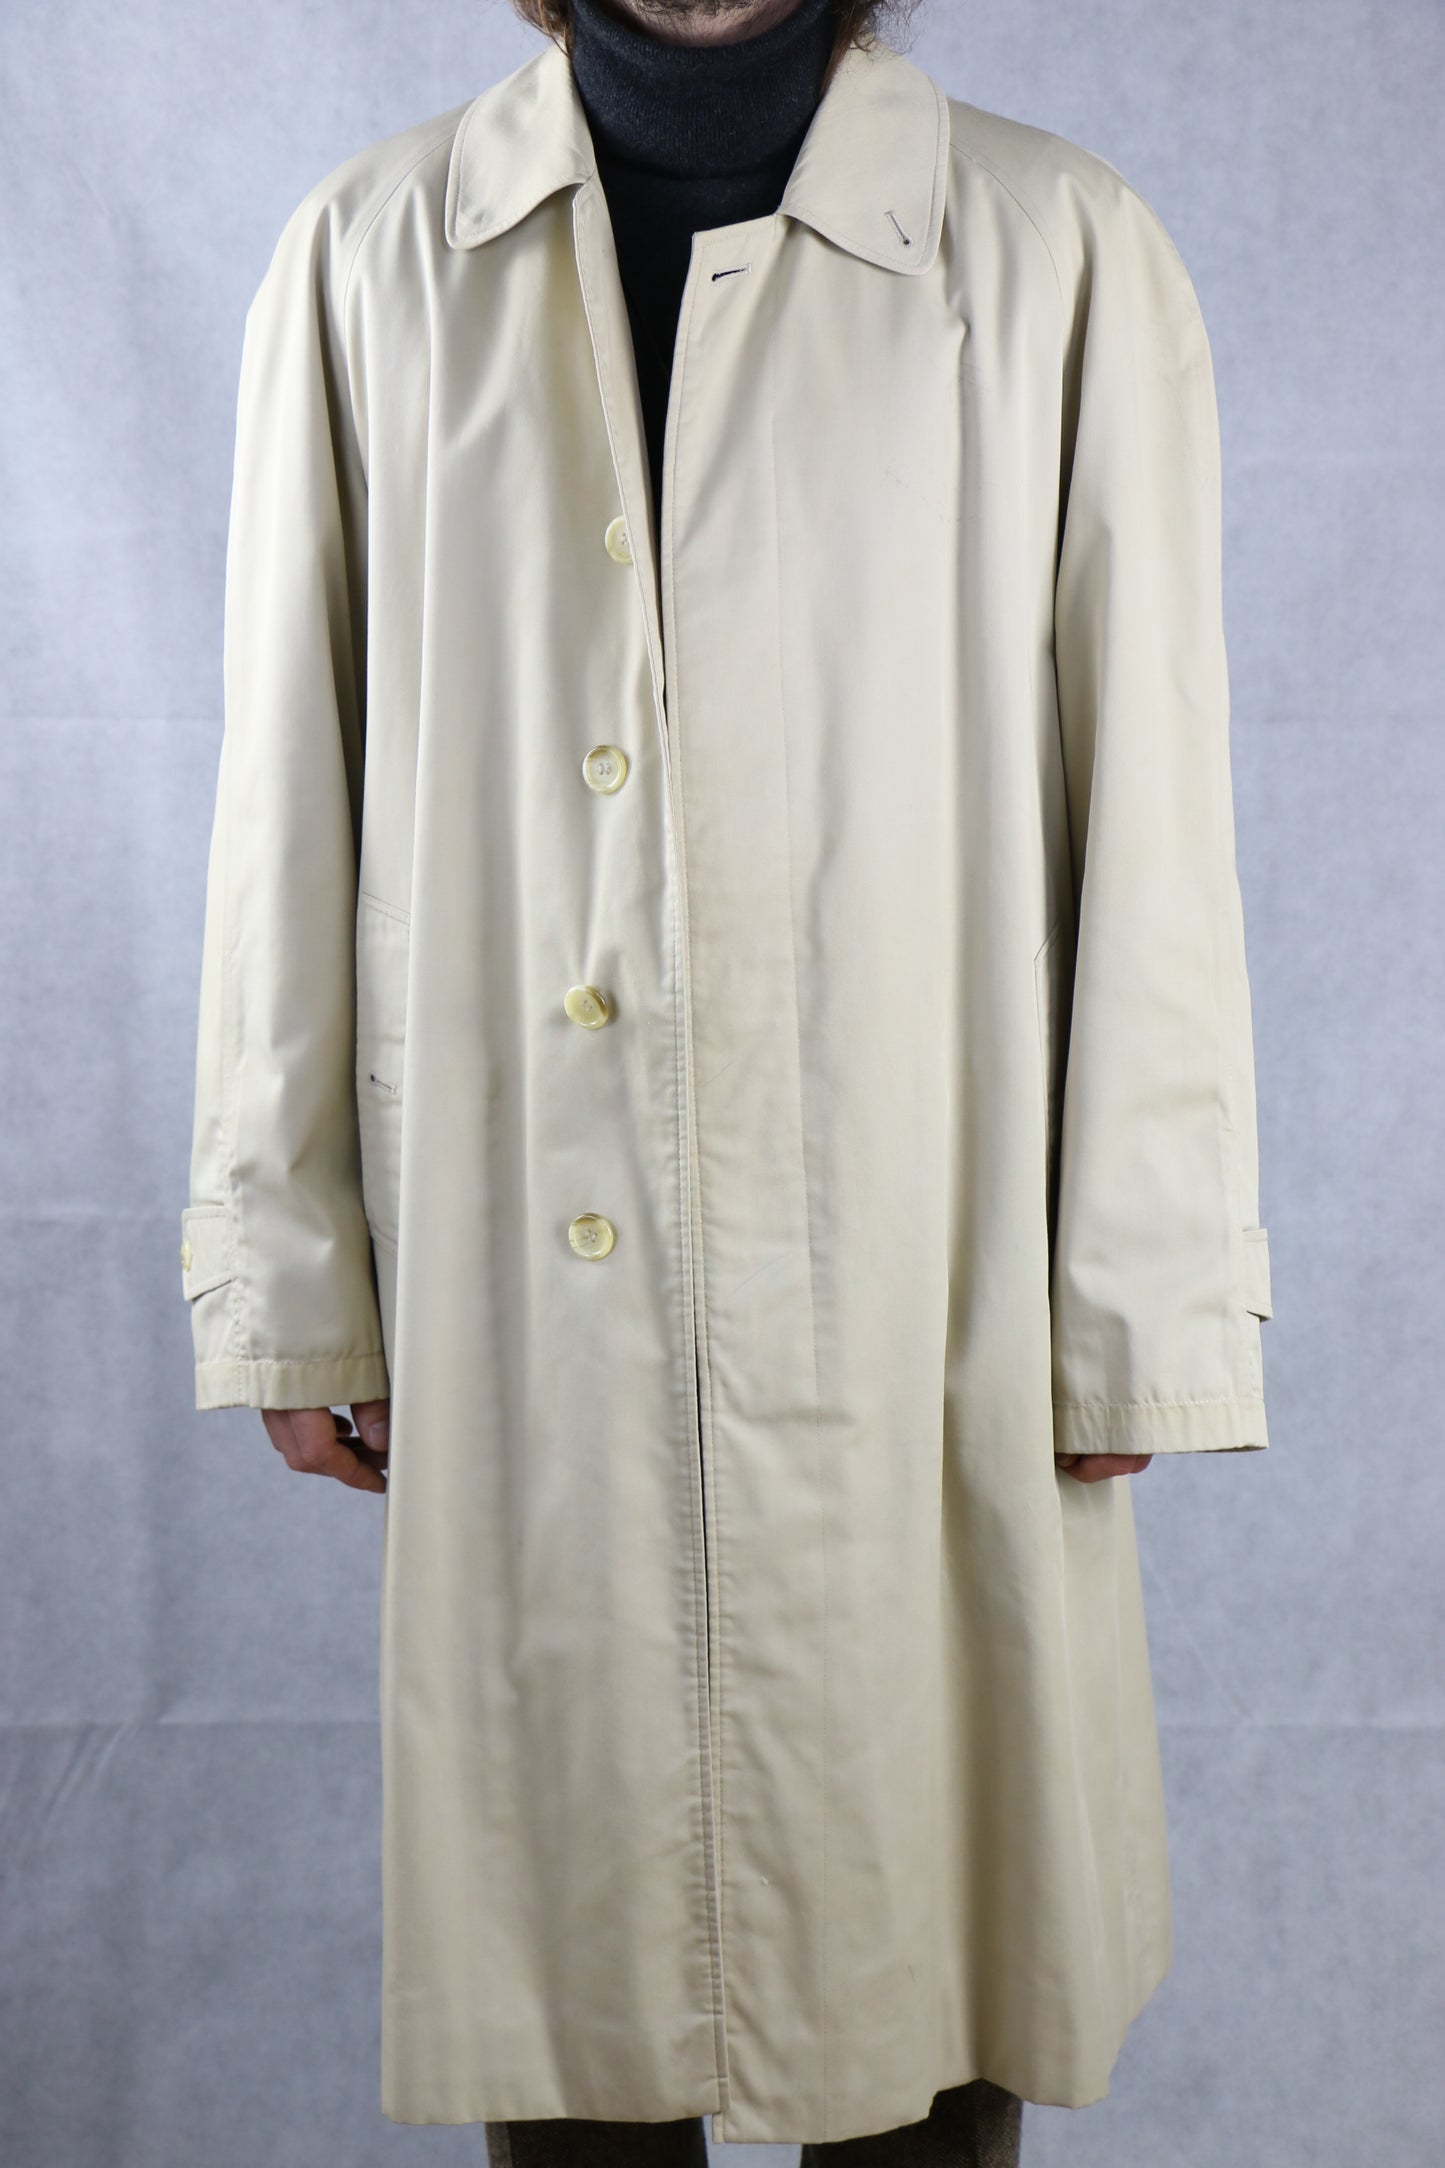 Burberry's Trench Coat 'L' Made in England, clochard92.com